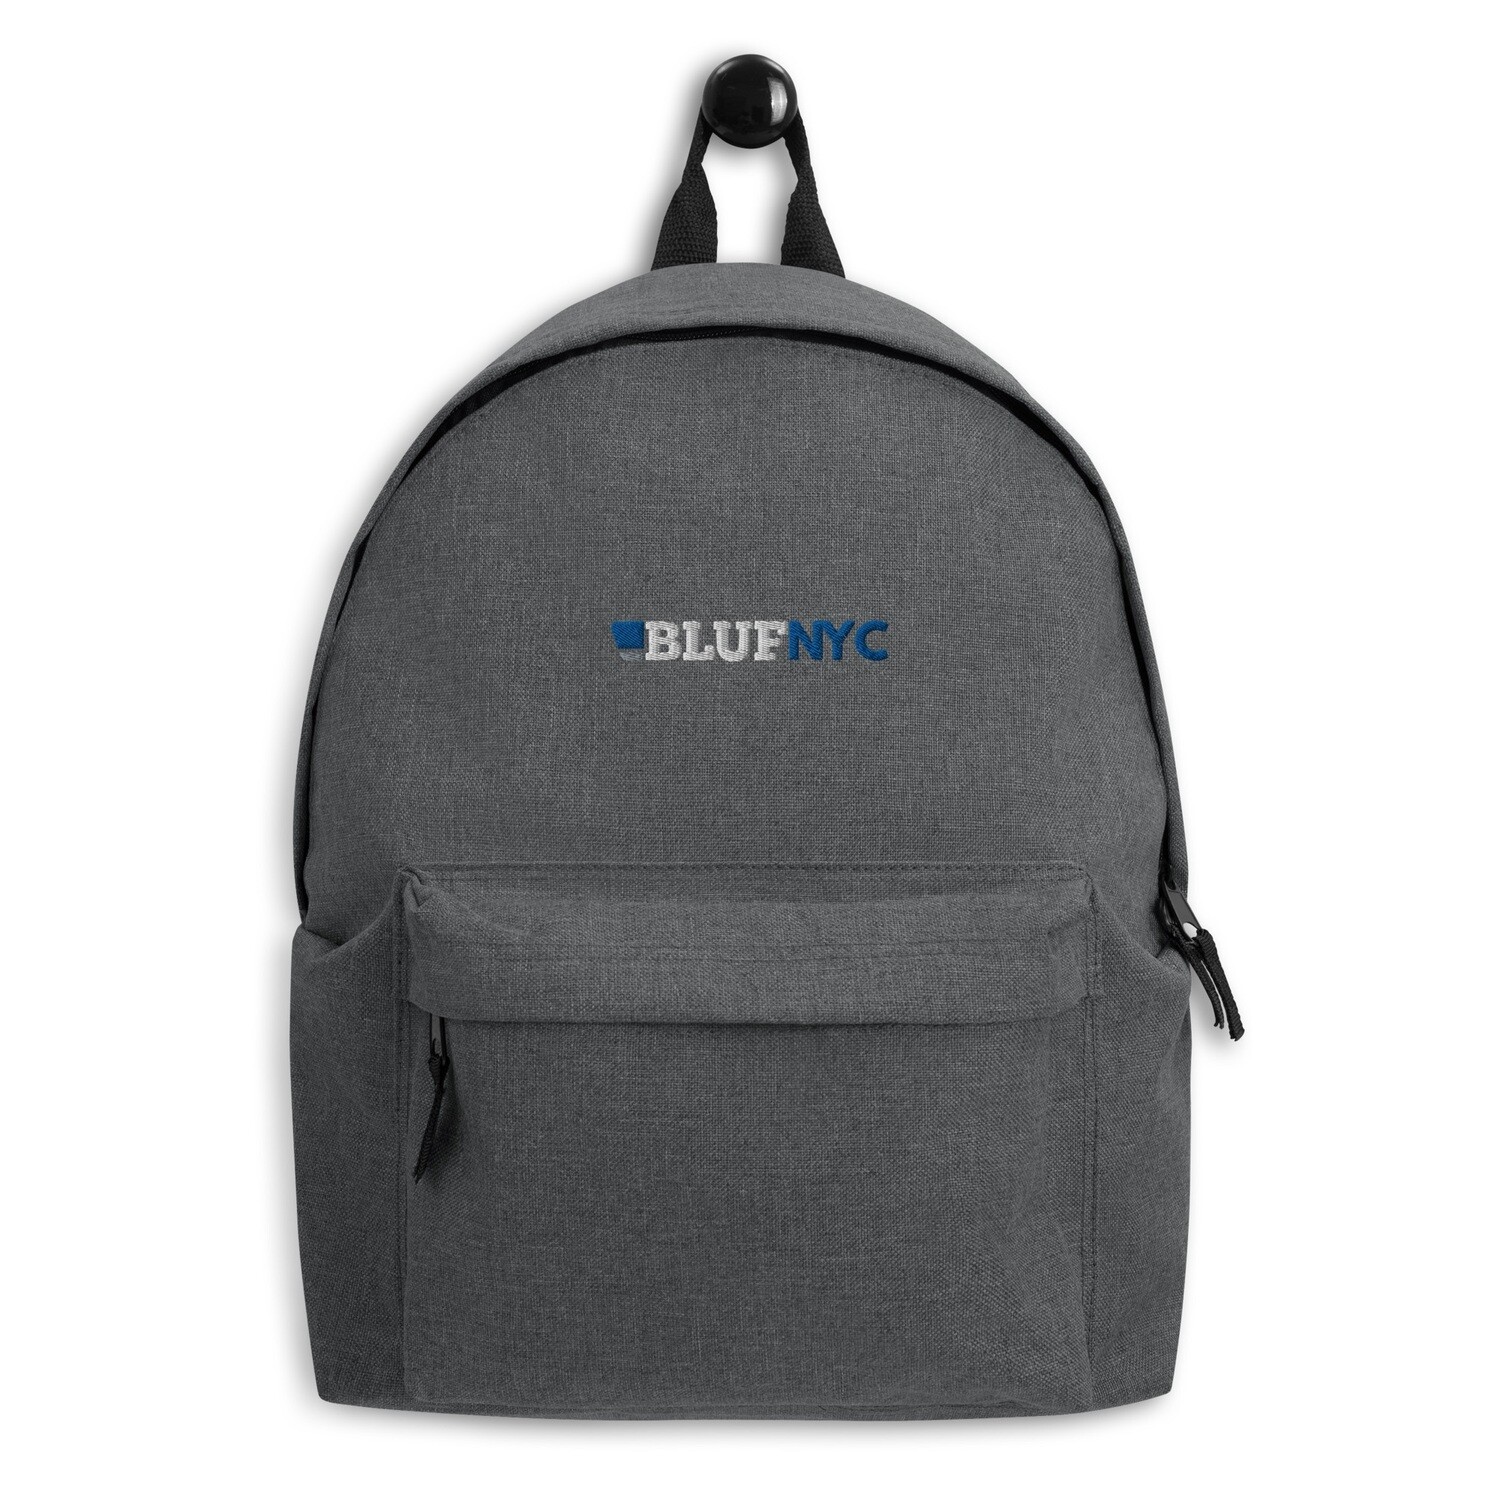 BLUF NYC Embroidered Backpack